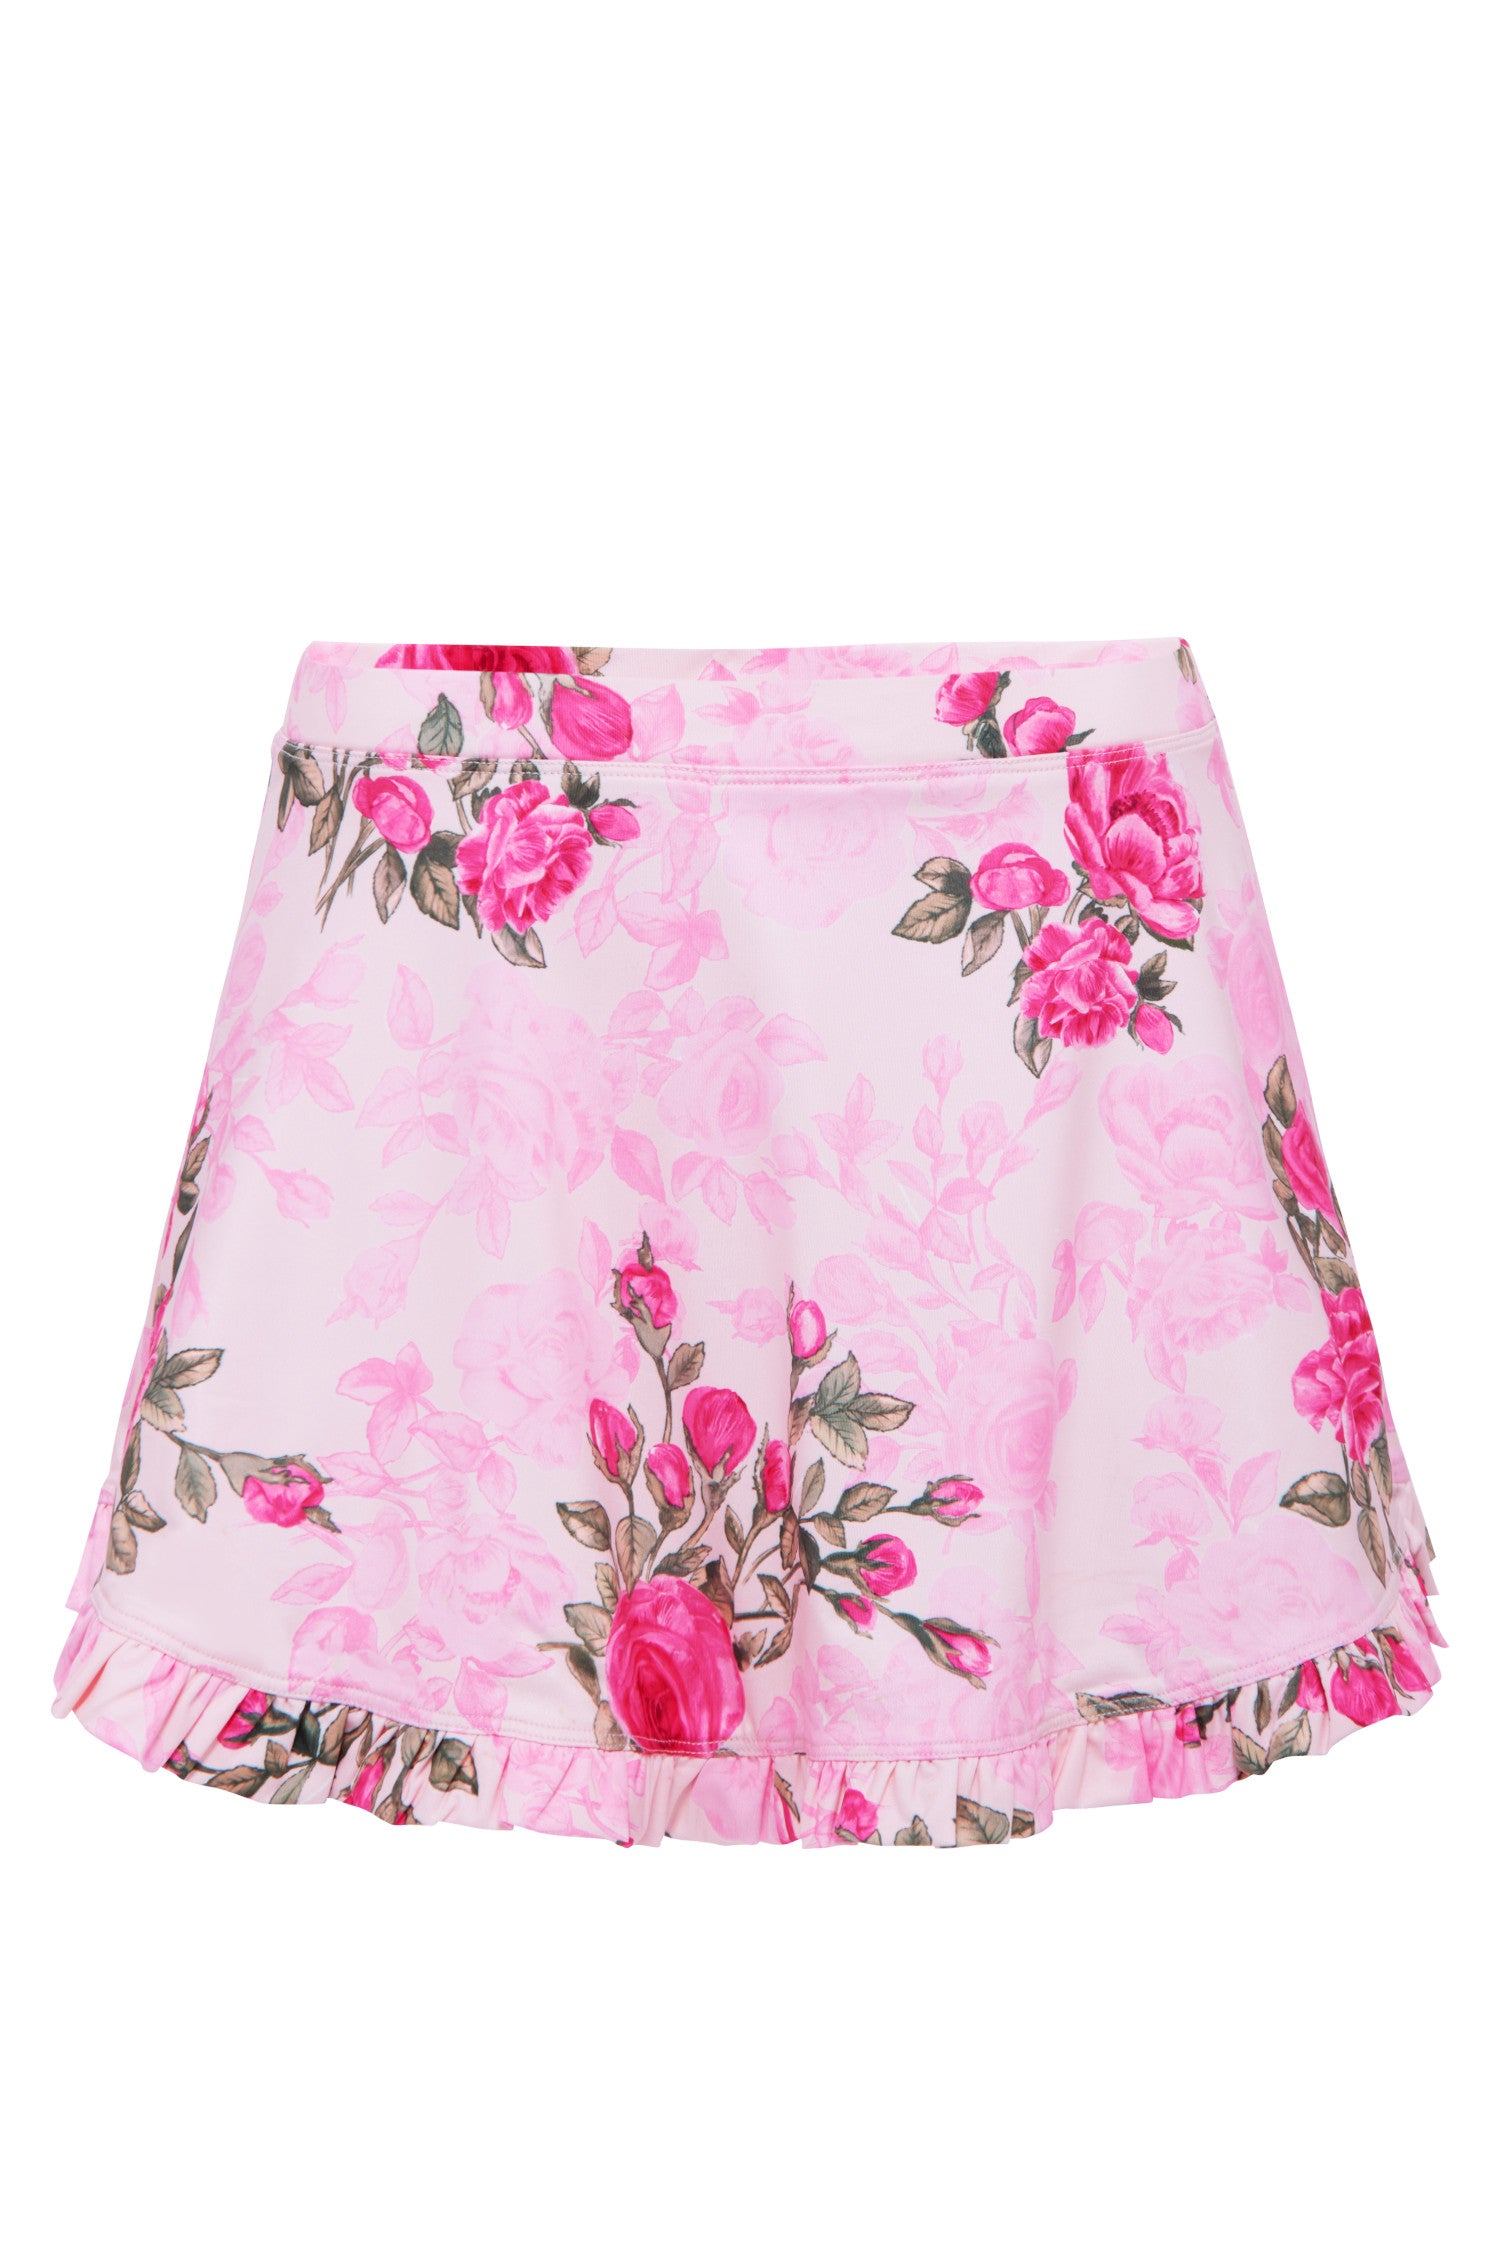 Pink floral mini skirt with ruffle hem.